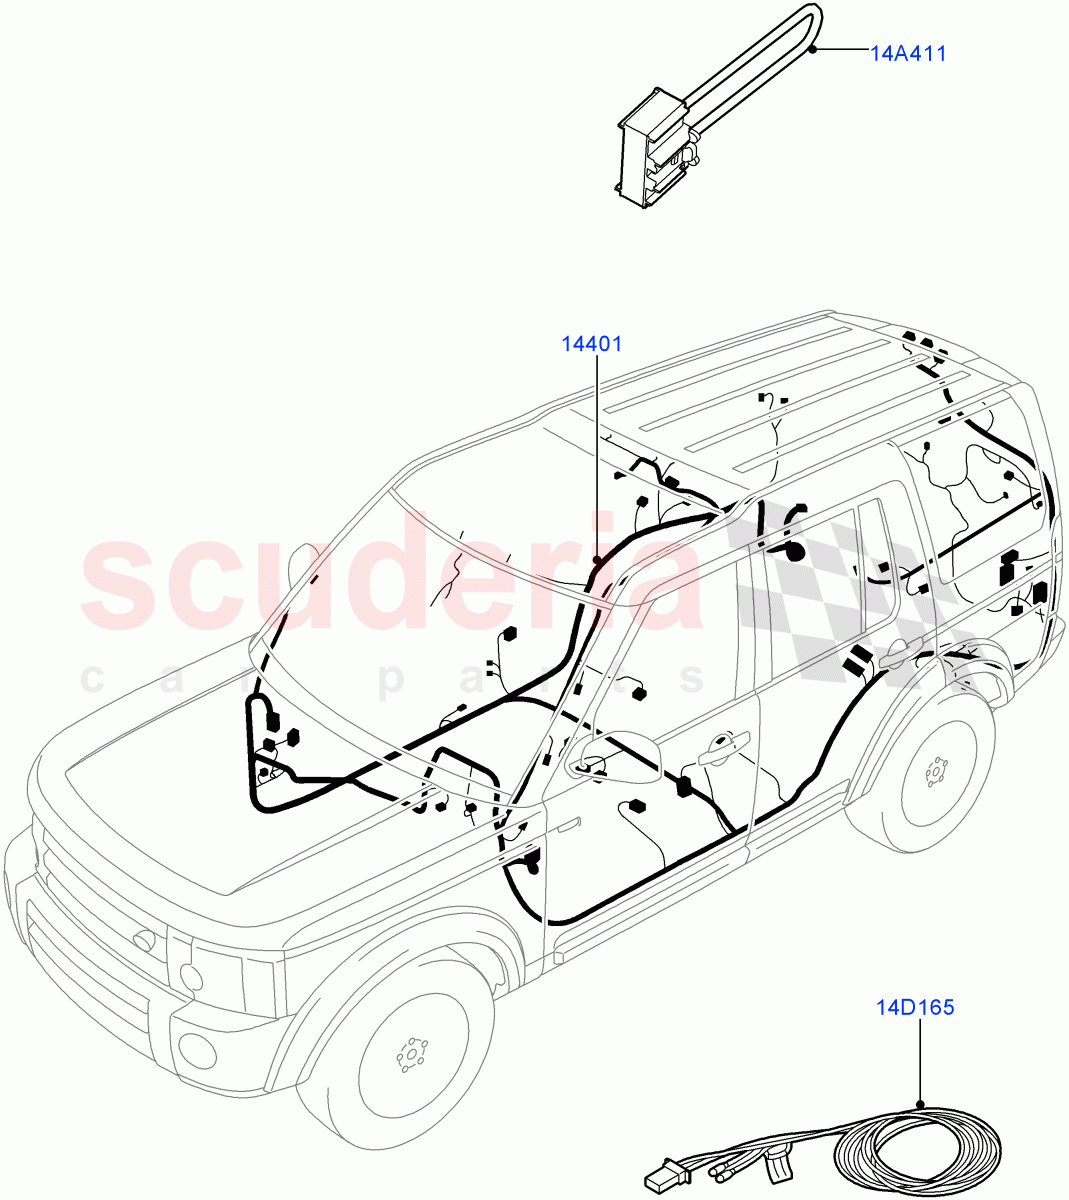 Electrical Wiring - Engine And Dash(Main Harness)((V)FROMBA000001,(V)TOBA999999) of Land Rover Land Rover Discovery 4 (2010-2016) [2.7 Diesel V6]